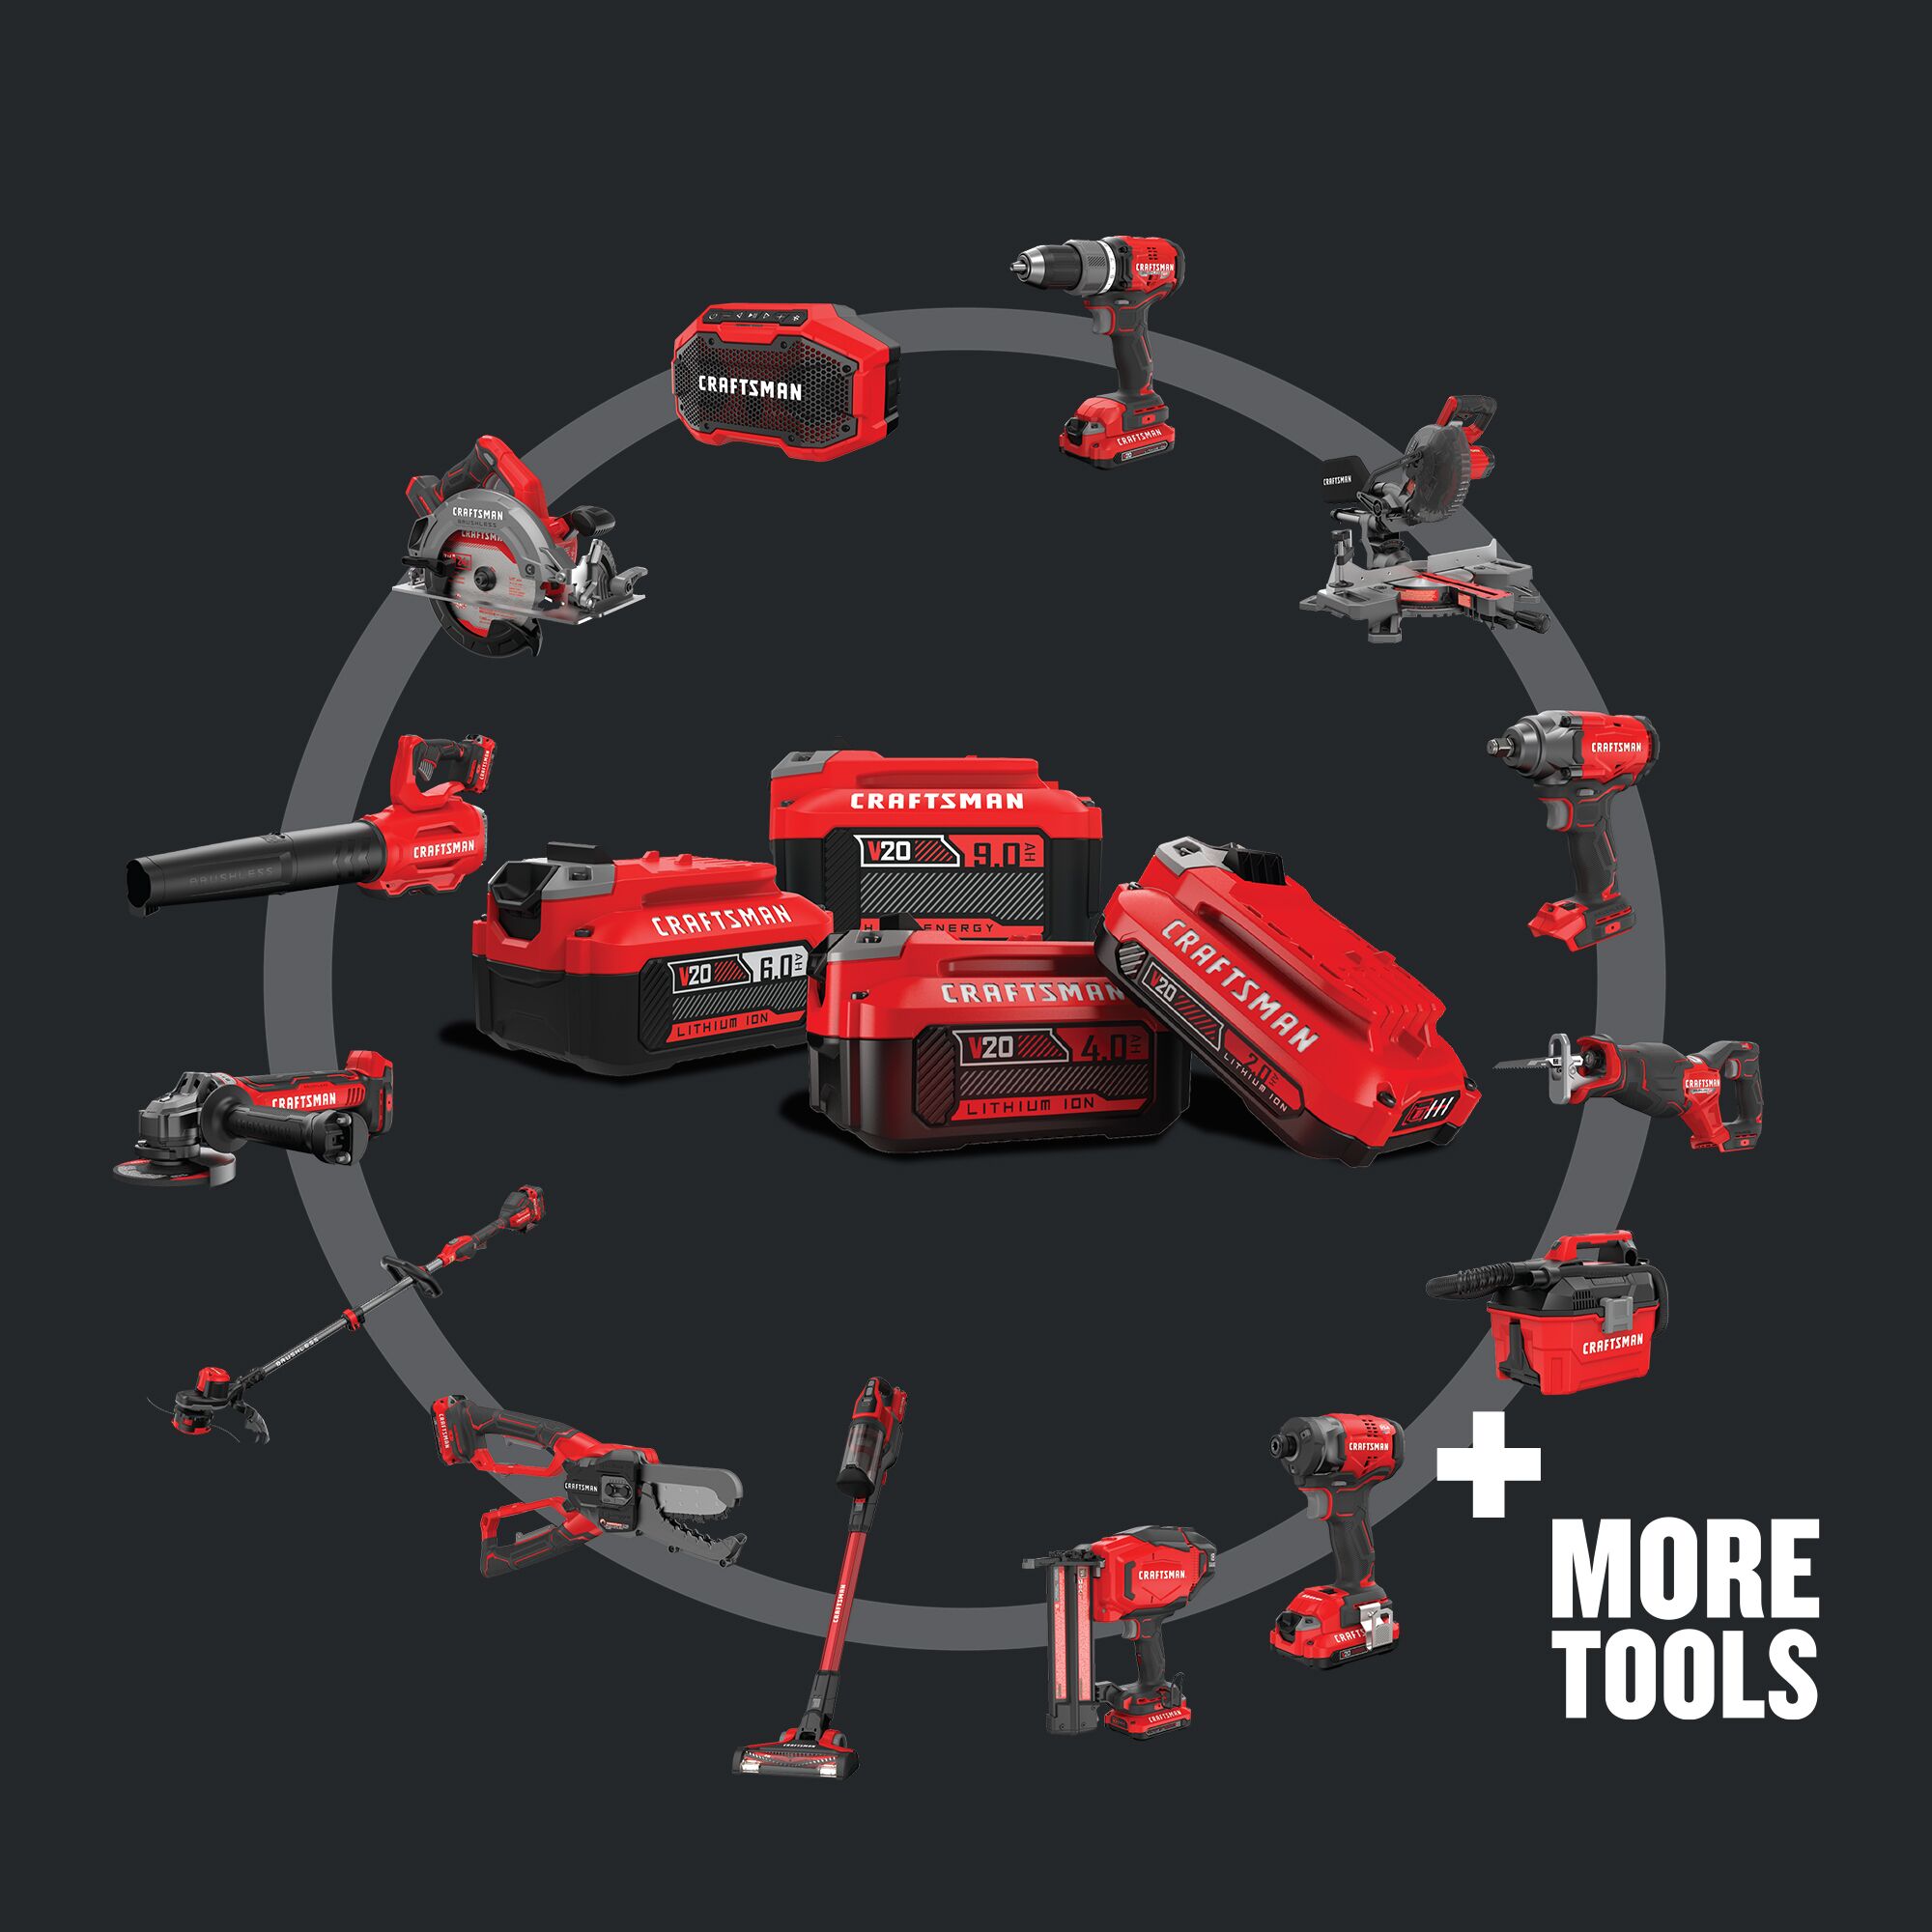 Graphic showing a variety of CRAFTSMAN(R) tools and batteries with text More tools
